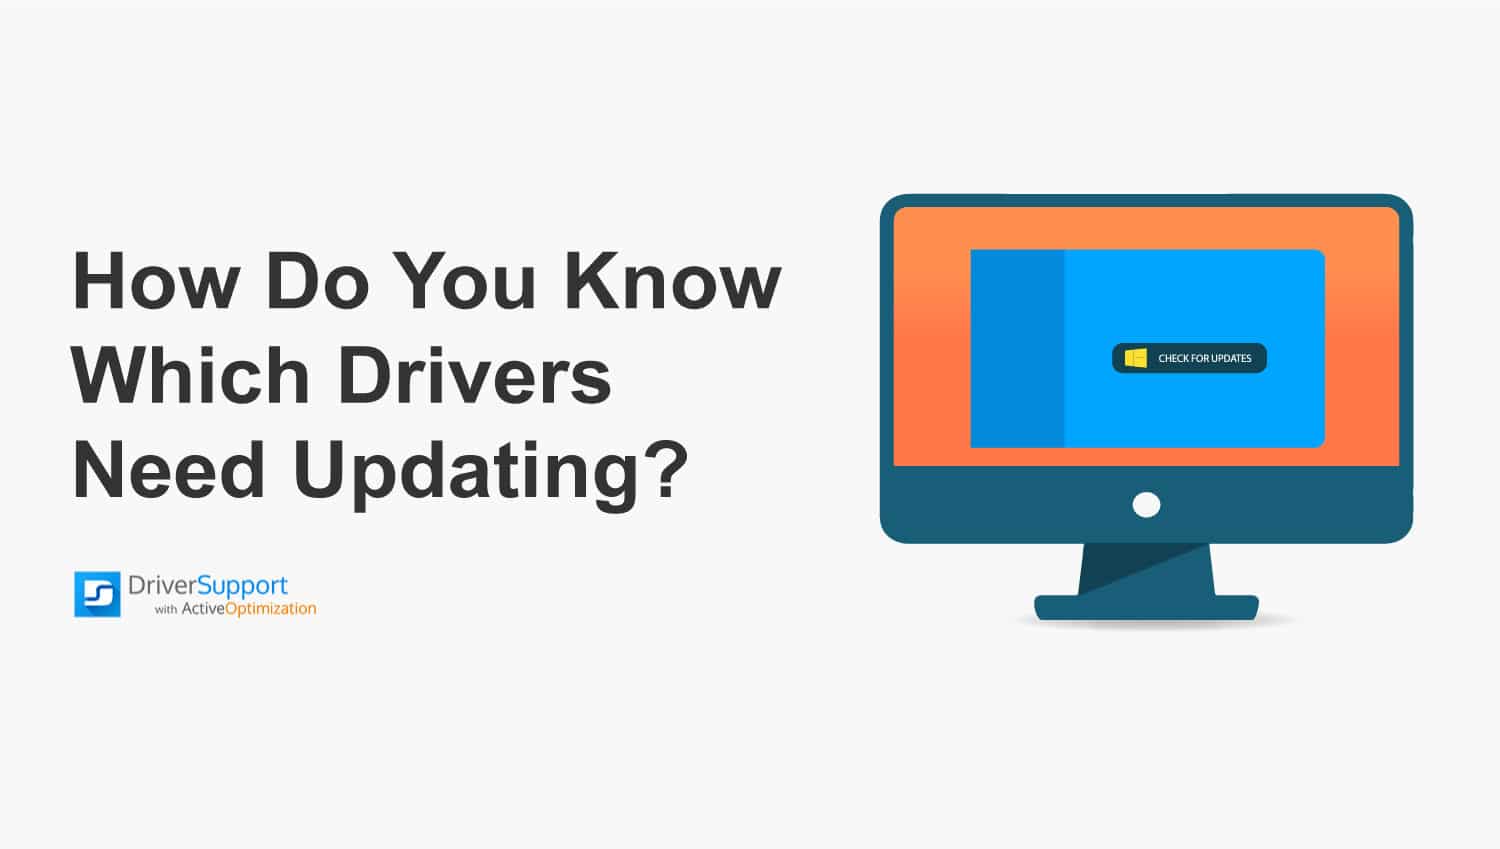 Restart your computer: After installing drivers, restart your computer to apply any changes and ensure proper functionality.
Regularly update drivers: Keep your system running smoothly by regularly checking for driver updates and installing the latest versions.